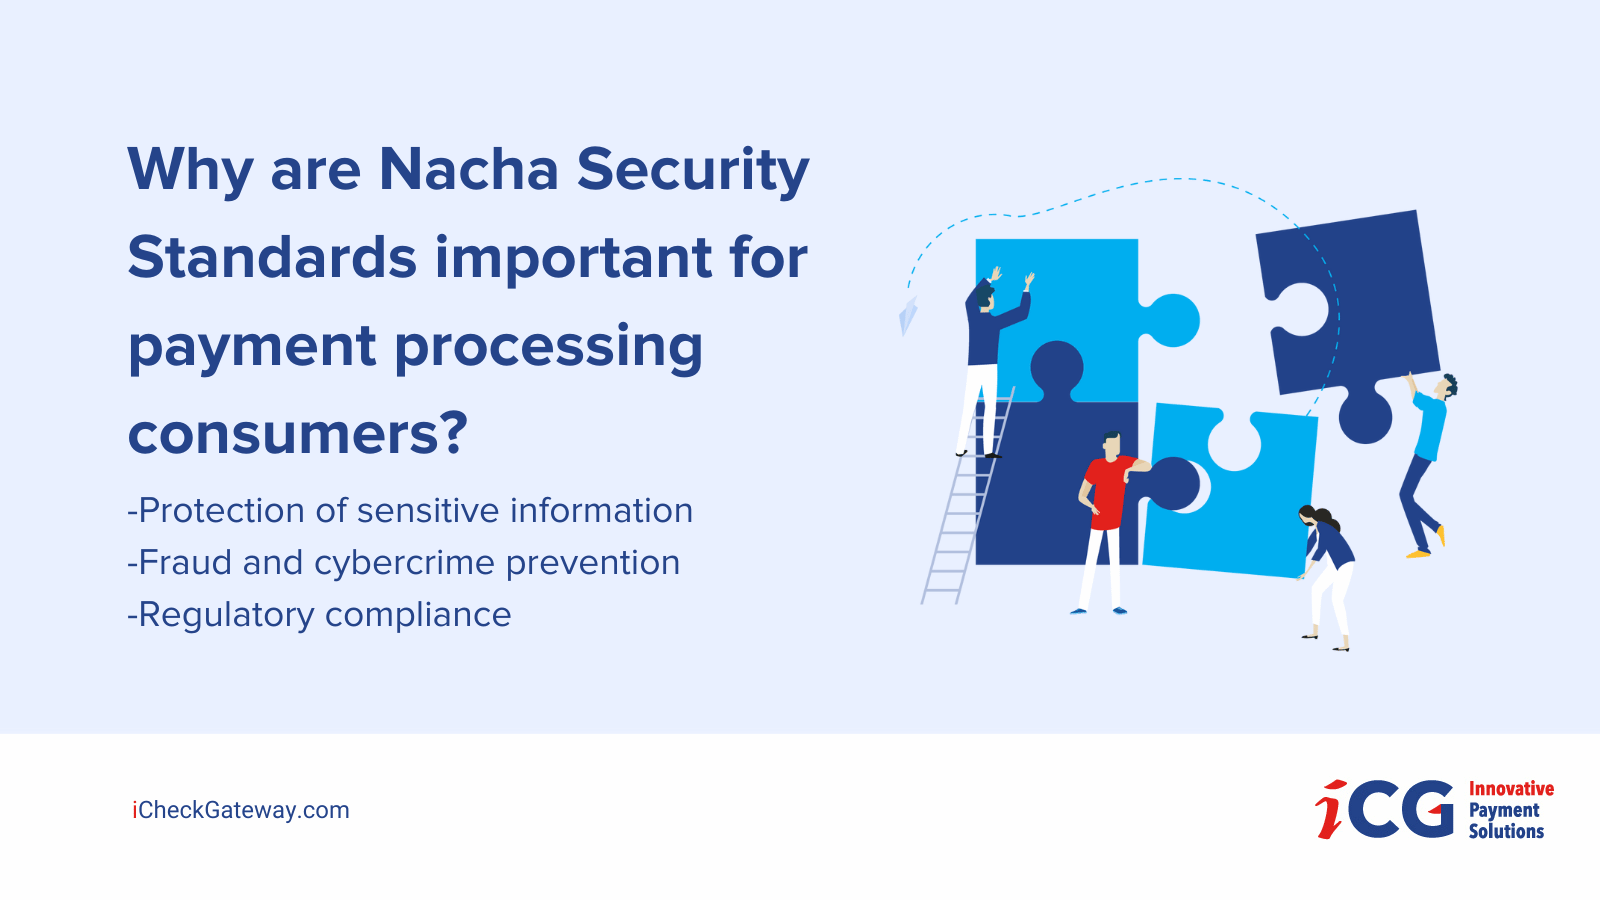 Why are Nacha Security Standards important for payment processing consumers